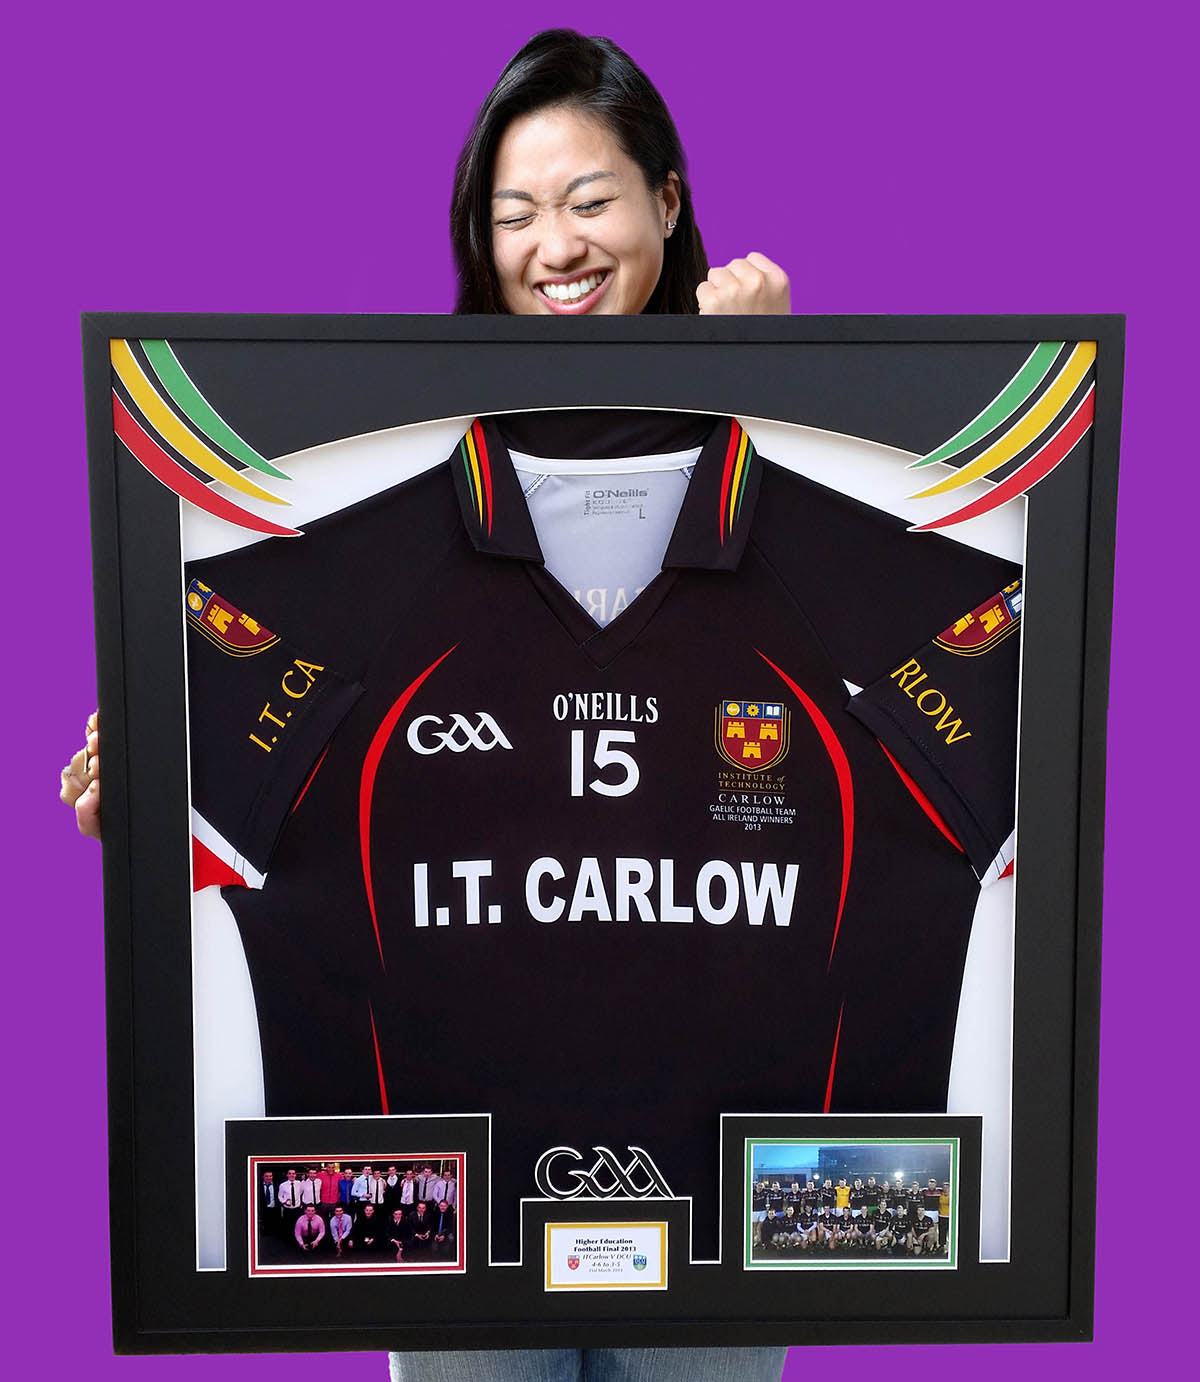 Colleges GAA football jersey frame - with graphic design elements